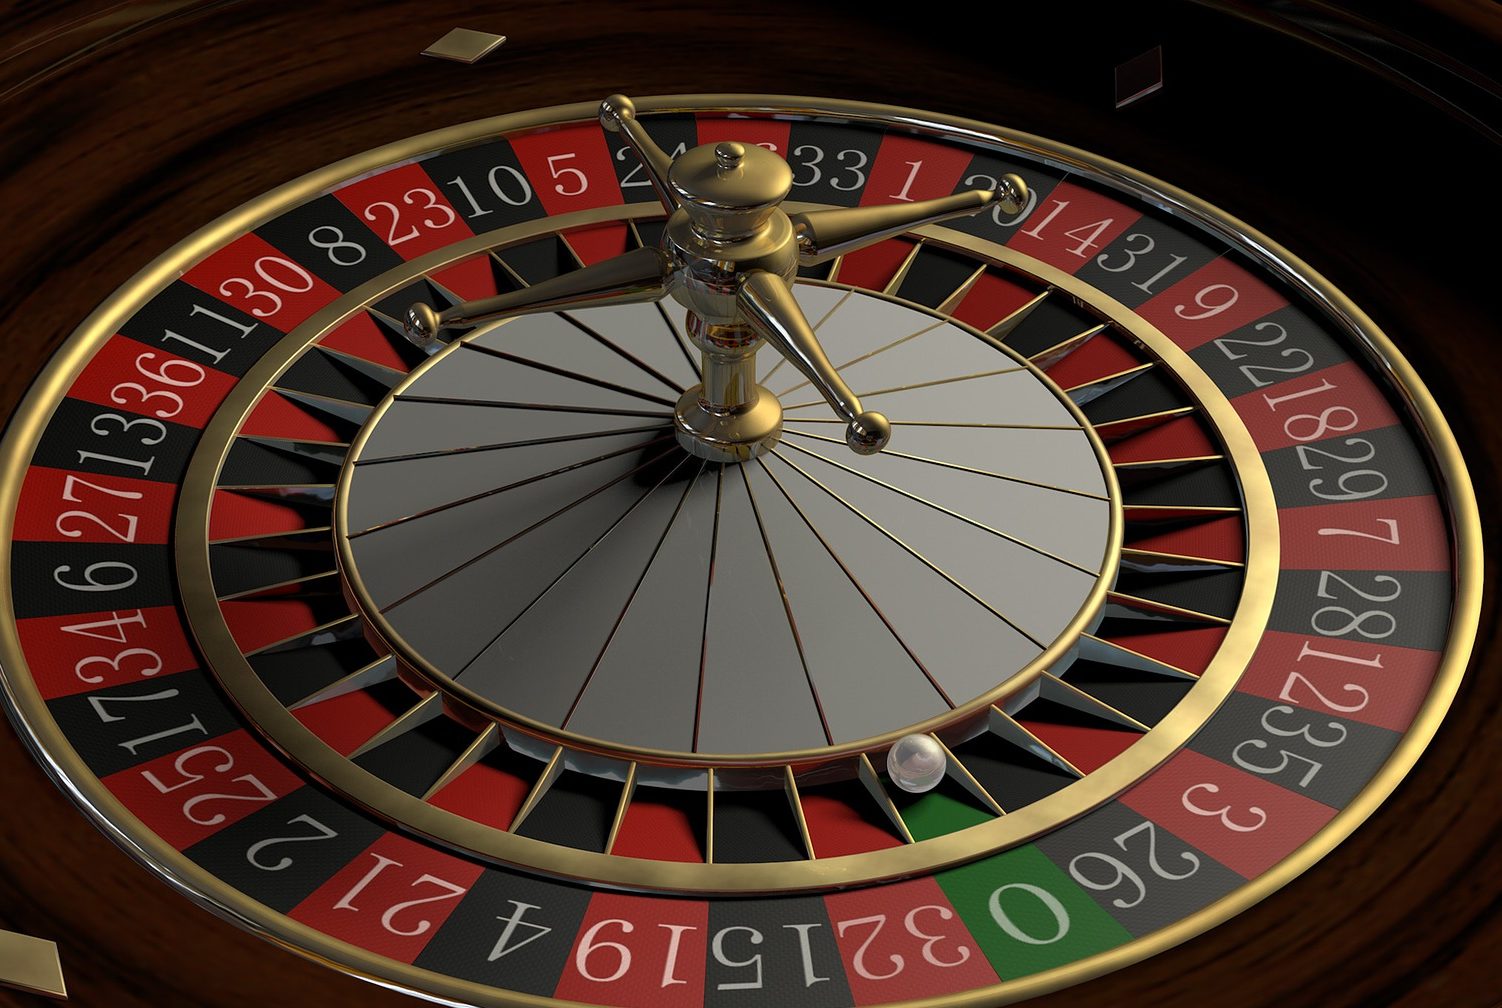 in article about gambling in new zealand, a roulette wheel